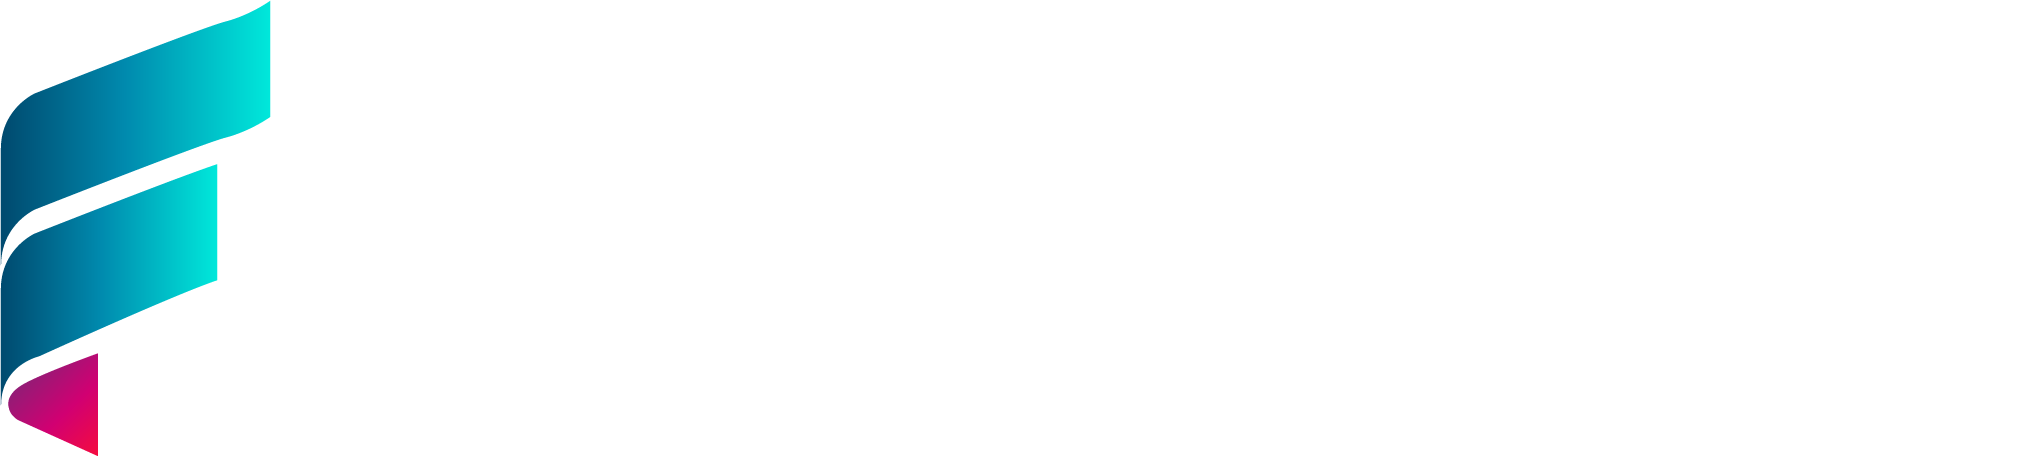 Faction - Artificial Intelligence & Machine Learning